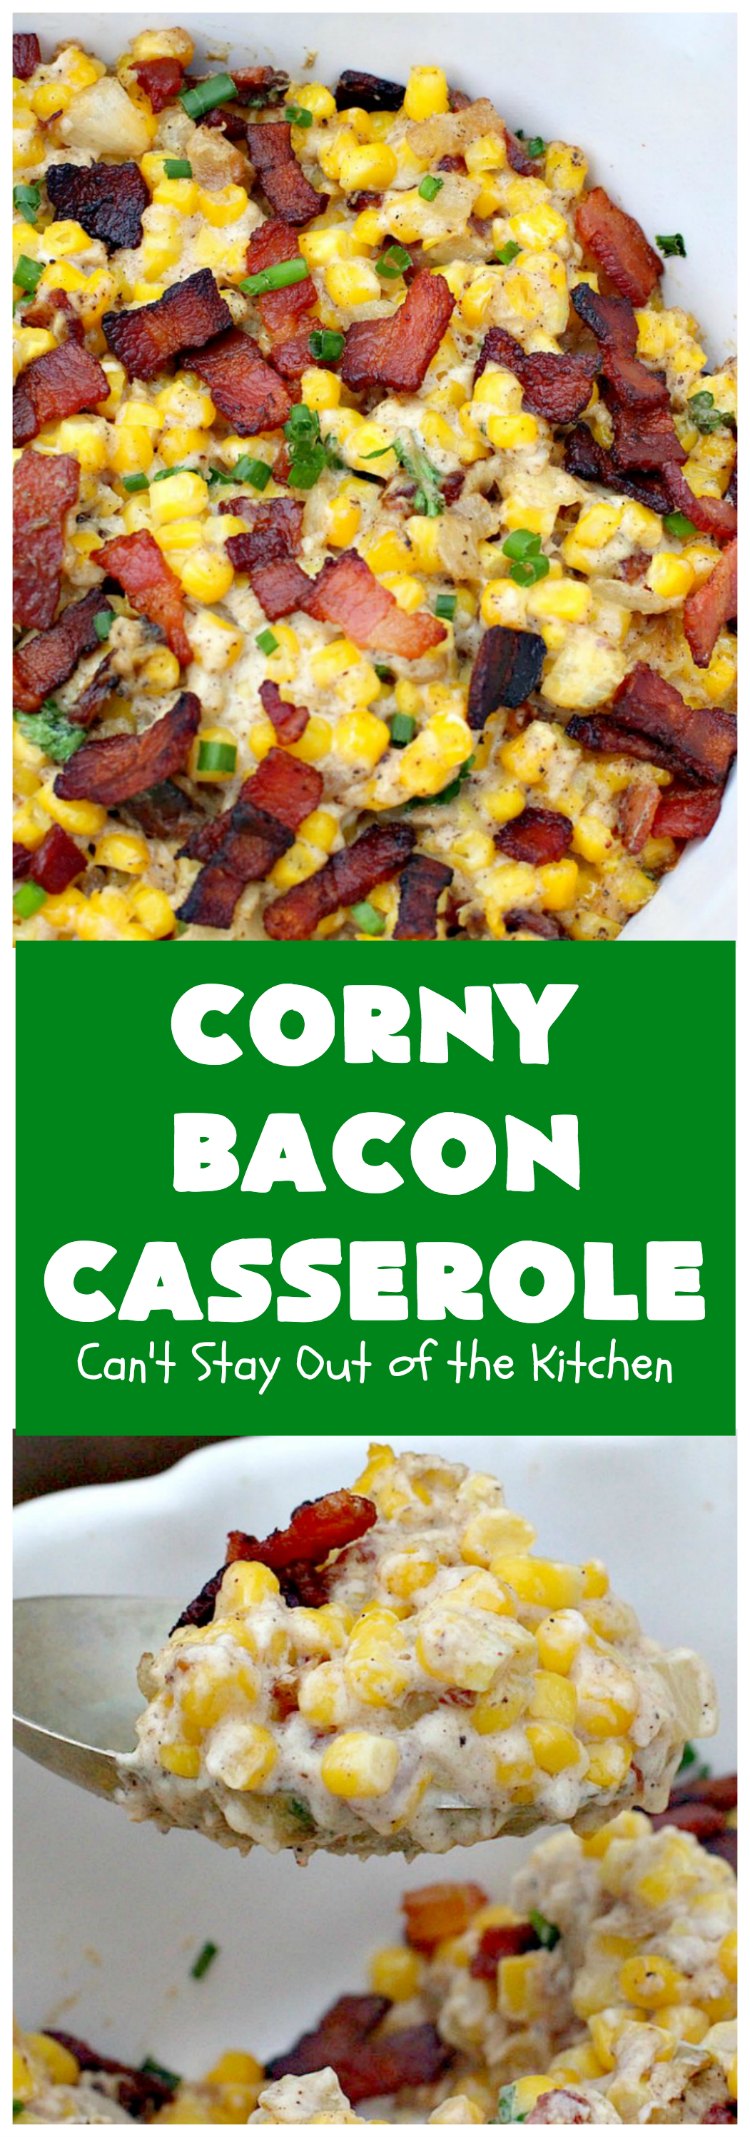 Corny Bacon Casserole | Can't Stay Out of the Kitchen